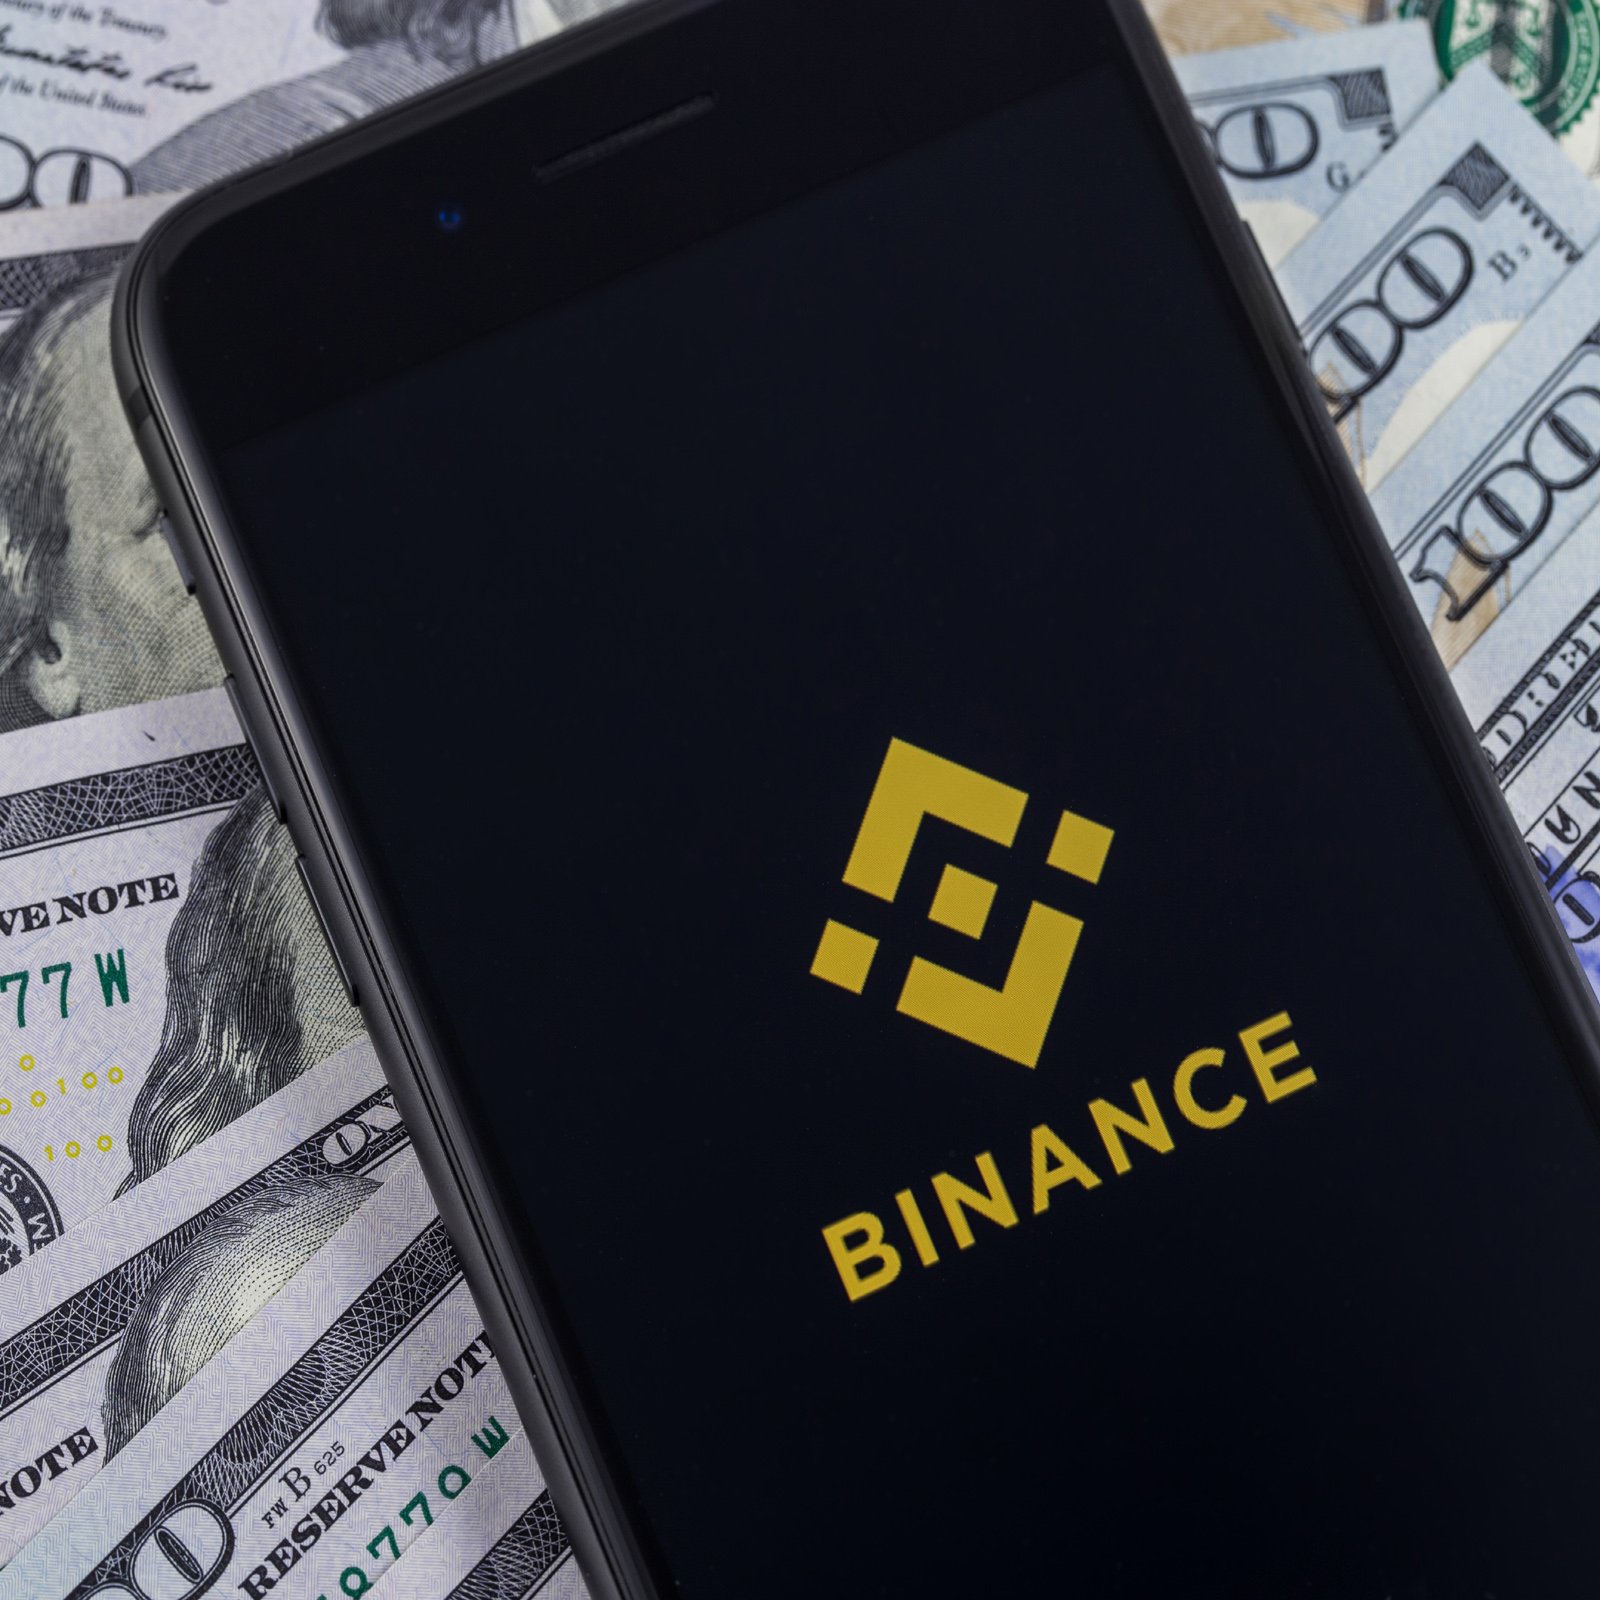 The Daily: Binance Tests Fiat Exchange, Russians Mull Own Crypto Platforms, ECB Not Ready for Coin